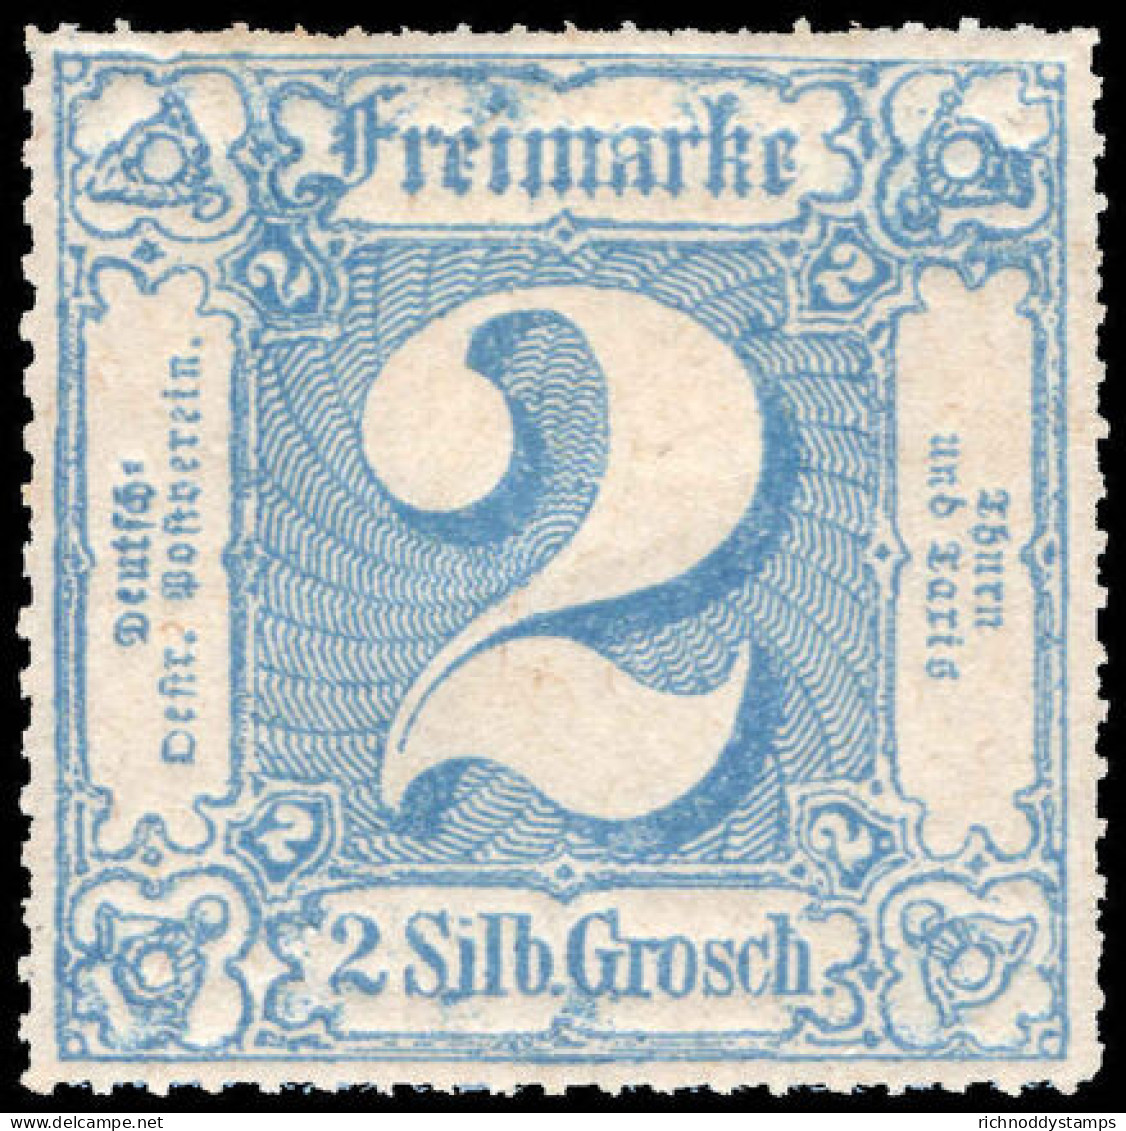 Thurn & Taxis Northern District 1866-67 2sgr Blue Rouletted In Colour Lightly Mounted Mint. - Postfris